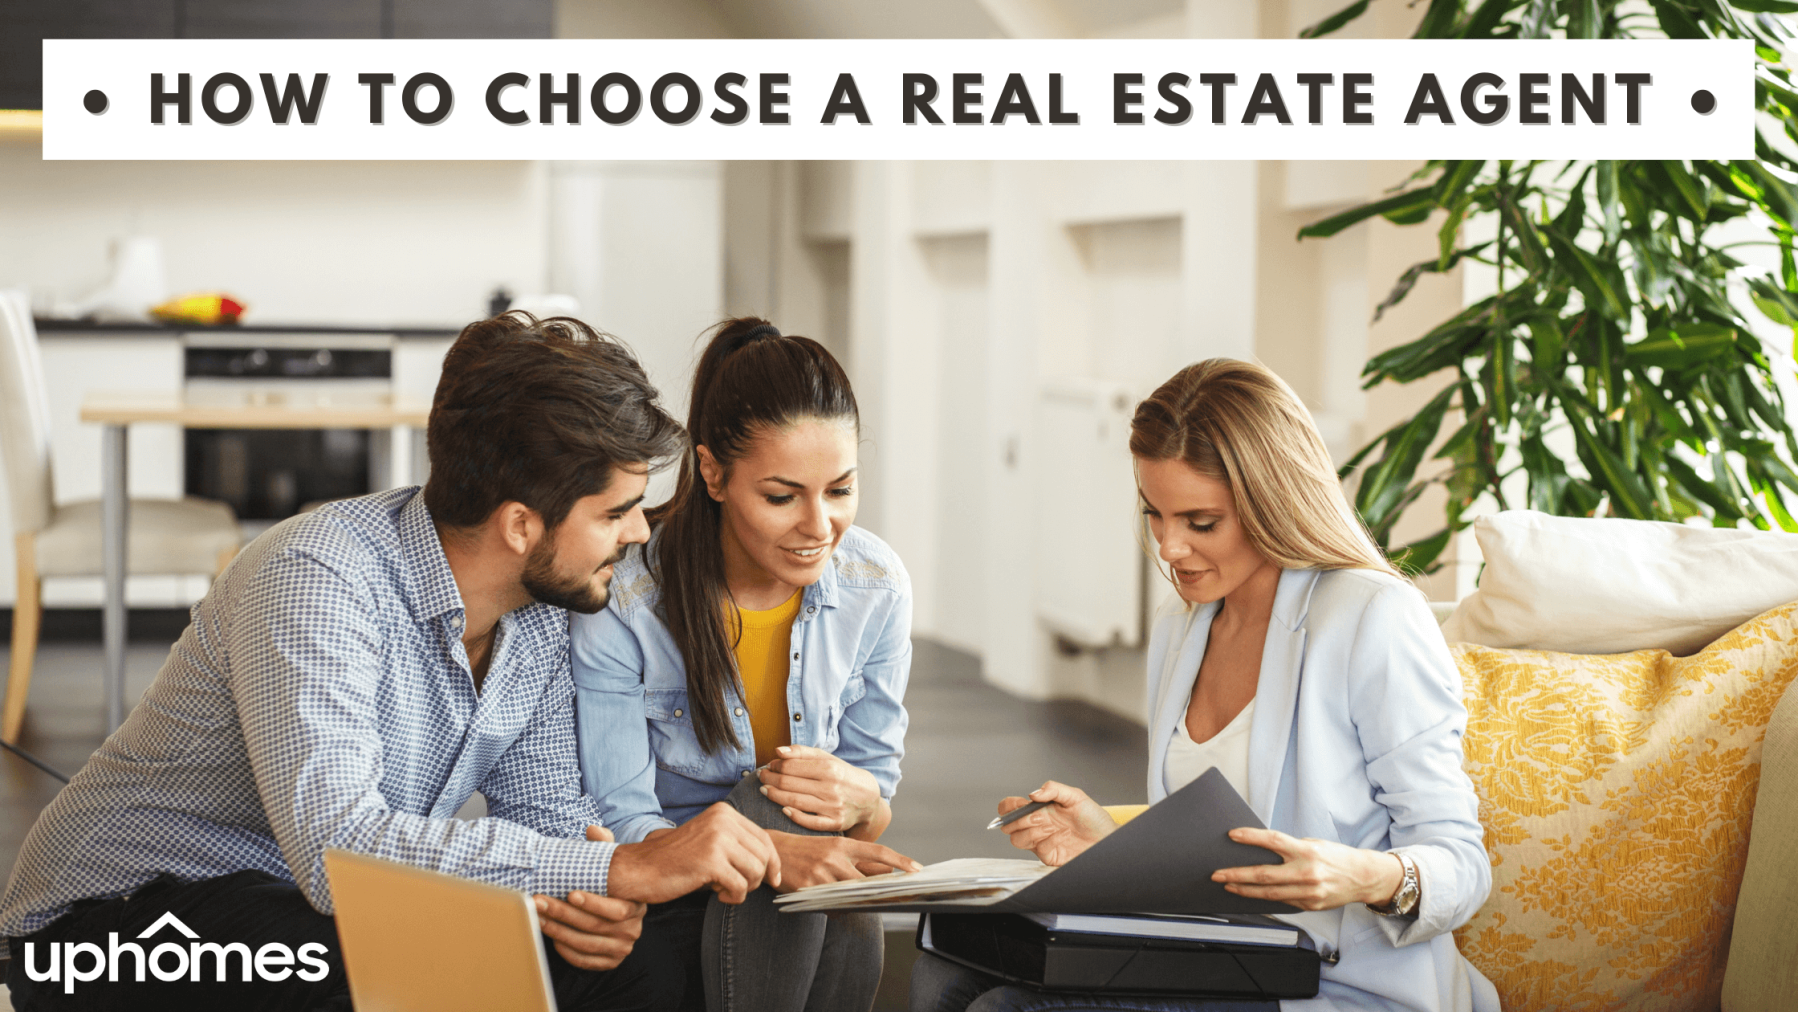 5 Key Takeaways: How to Choose a Real Estate Agent